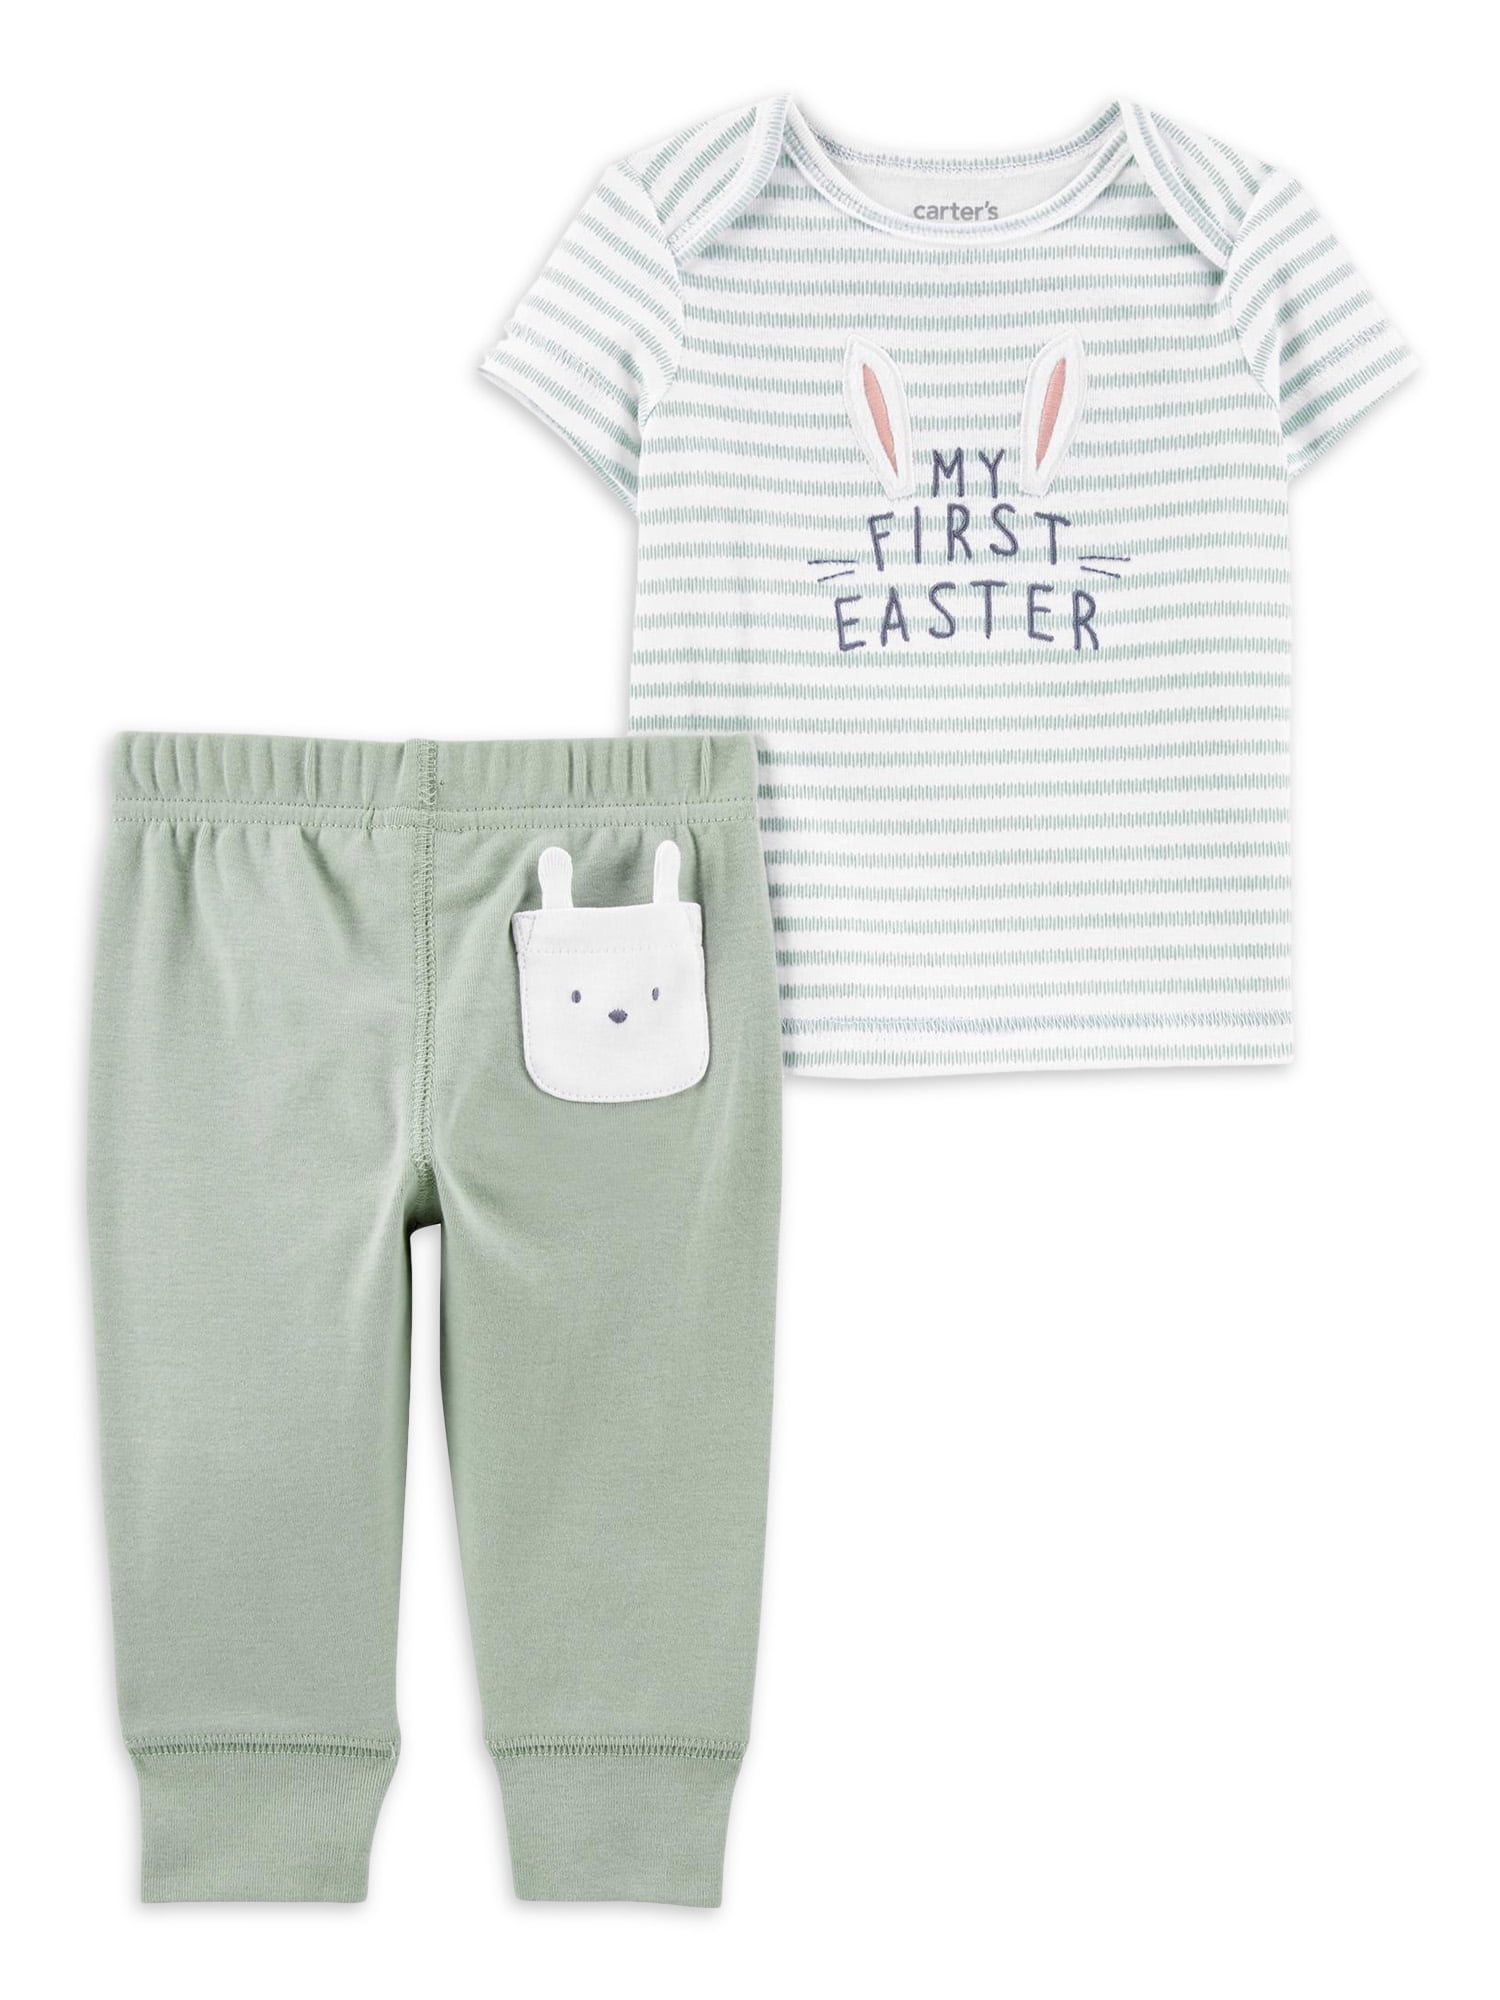 Carter's Child of Mine Baby Unisex Easter Outfit Set, 2-Piece, Sizes Preemie-12M